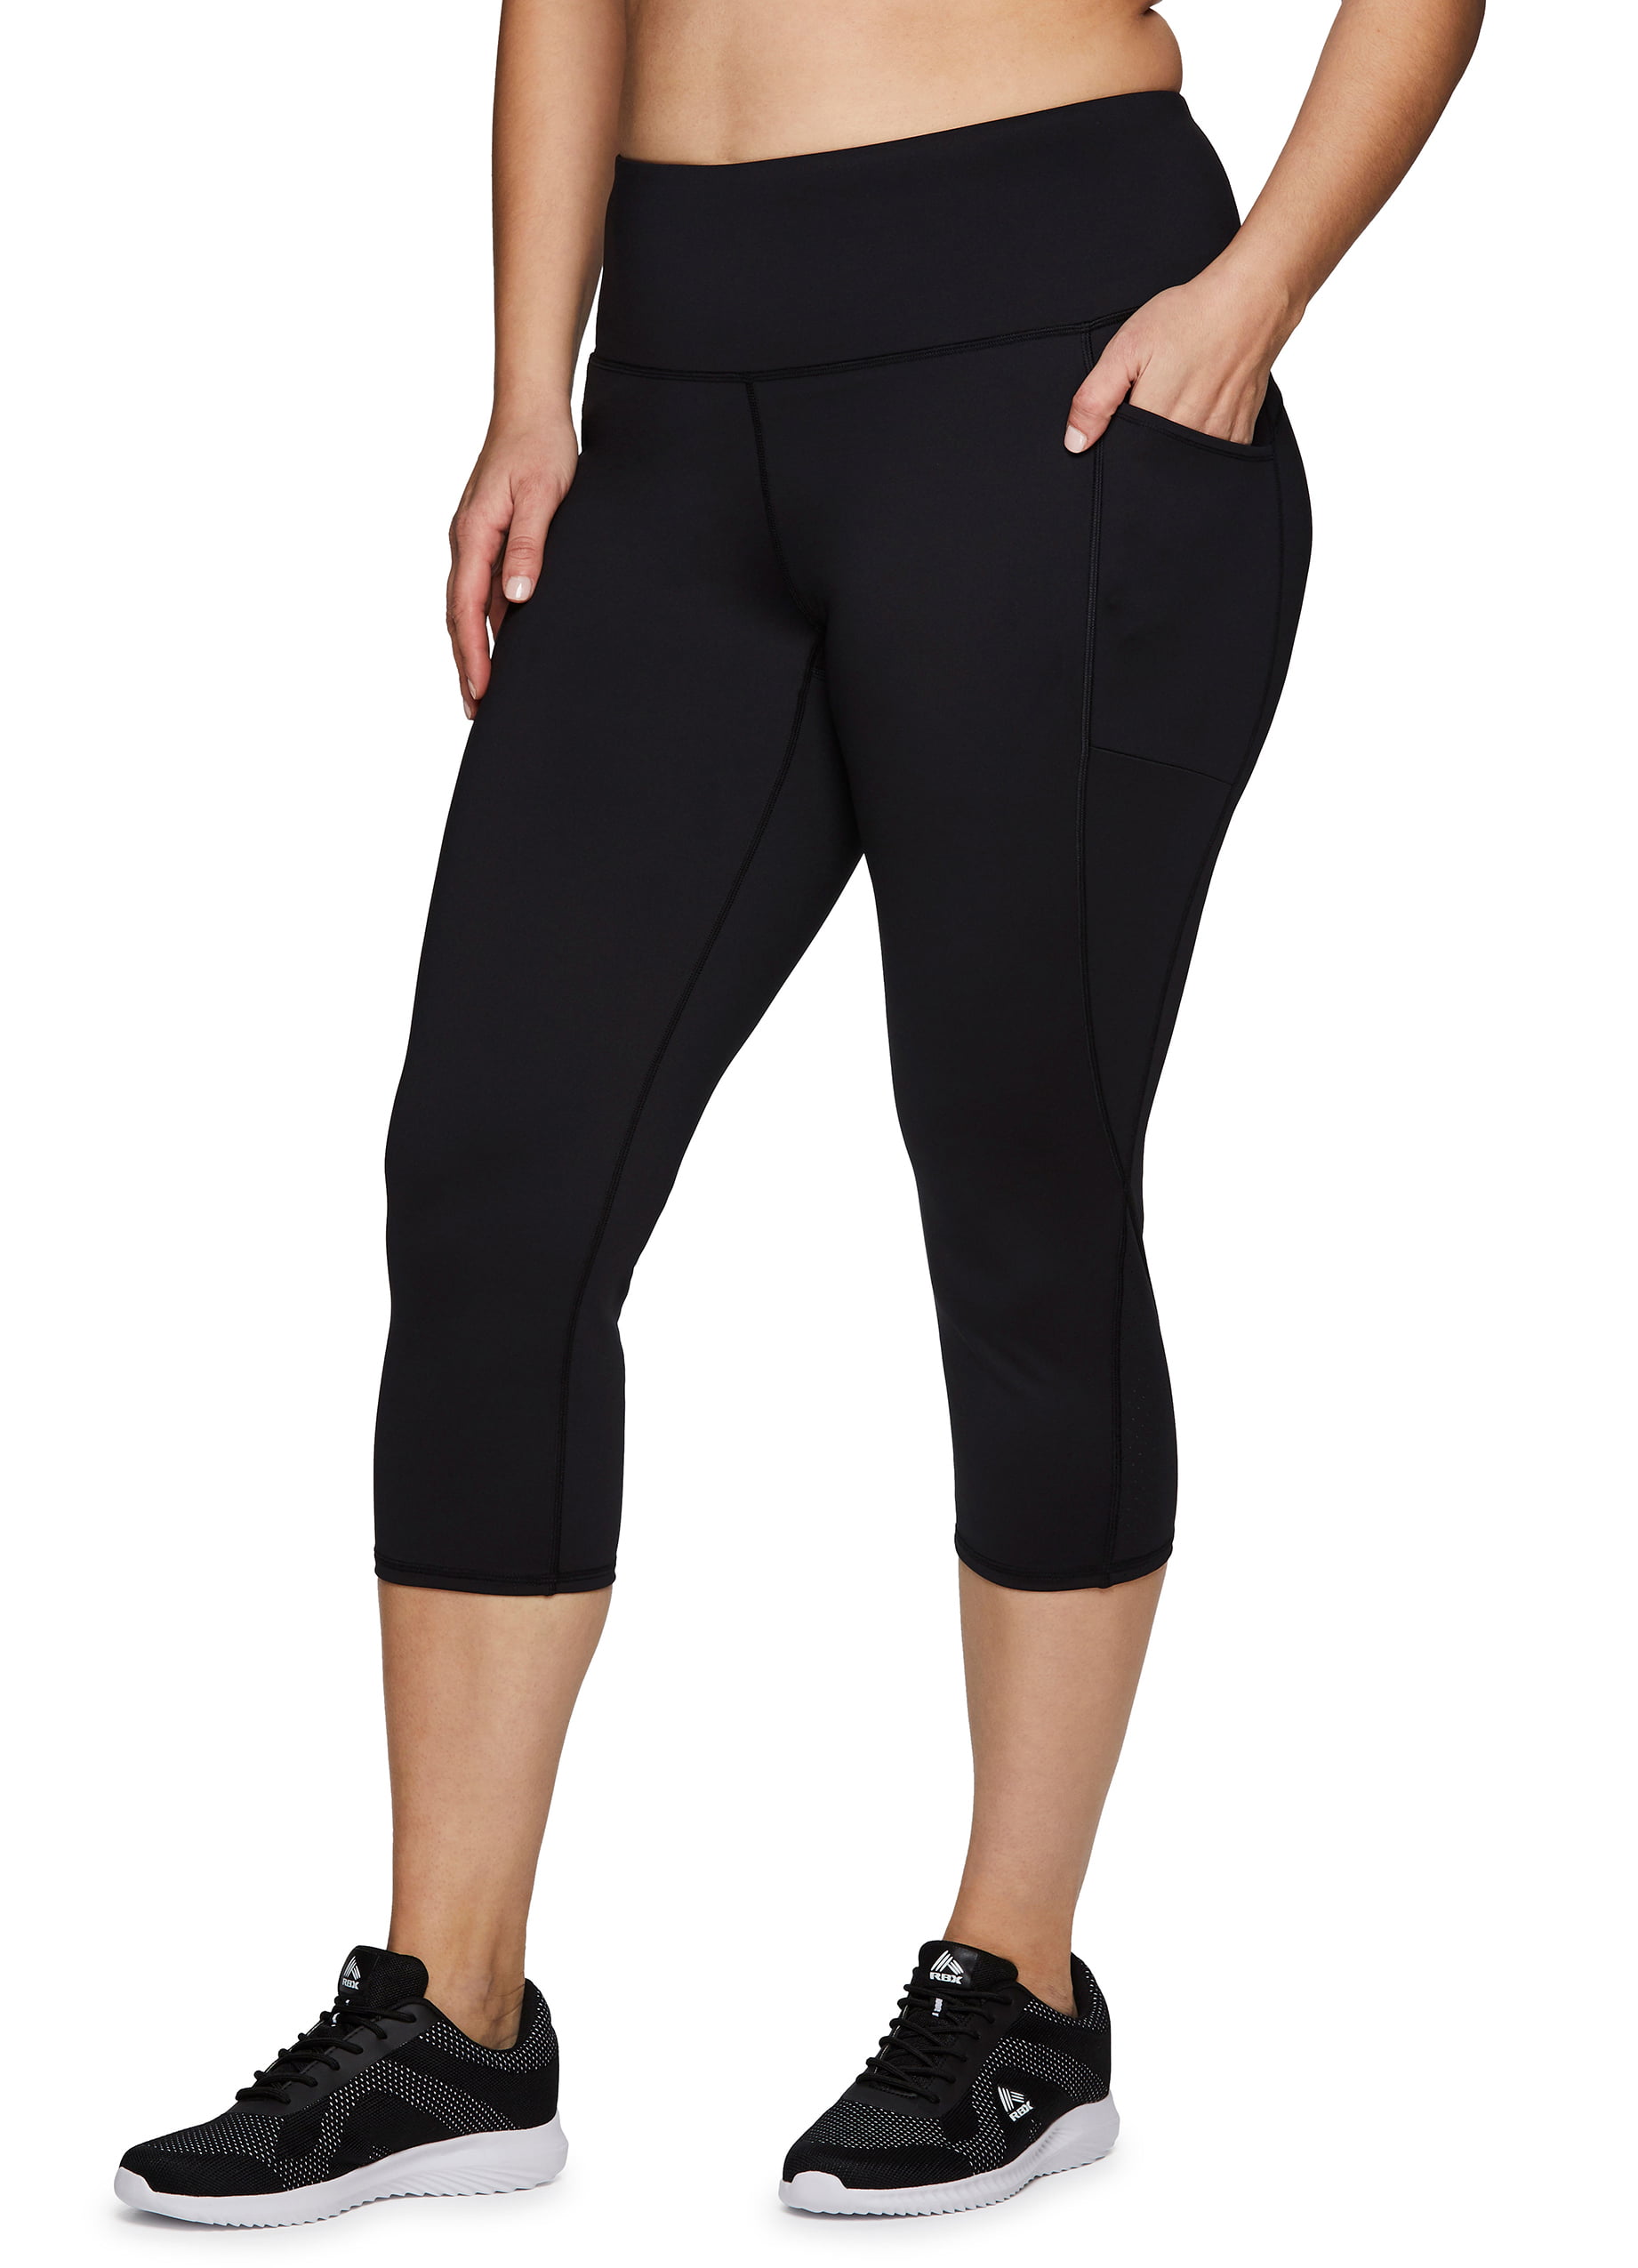  GAYHAY Leggings with Pockets for Women Reg & Plus Size